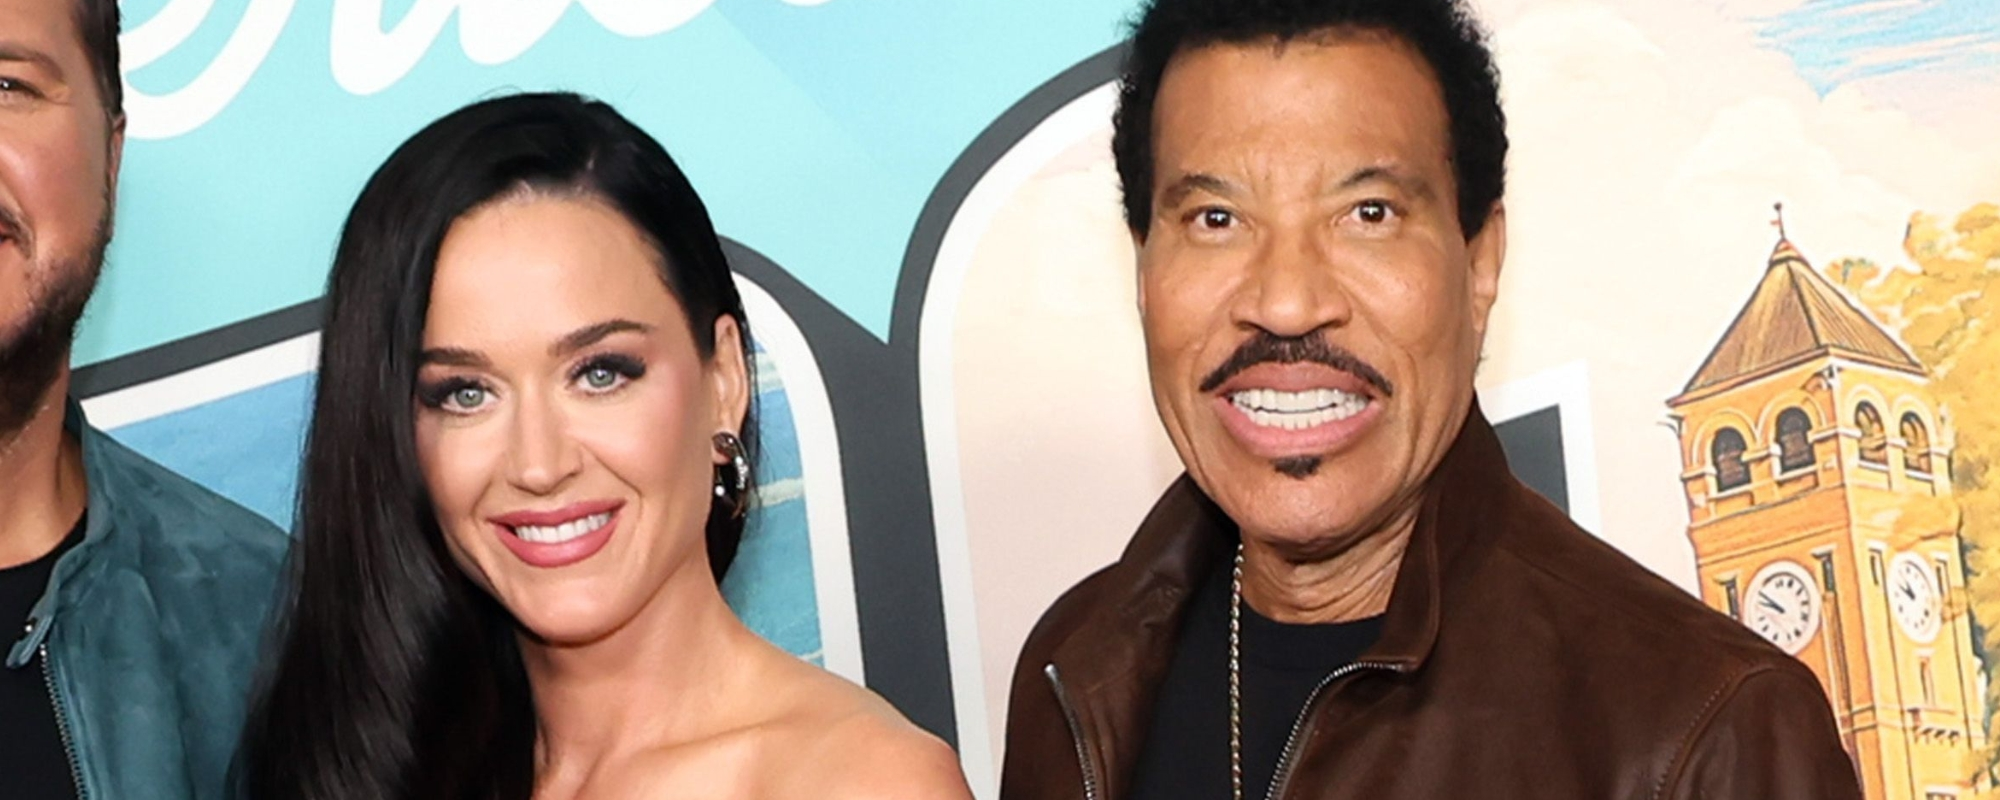 Lionel Richie Eyeing “At Least Two” Friendly Faces To Replace Katy Perry on ‘American Idol’